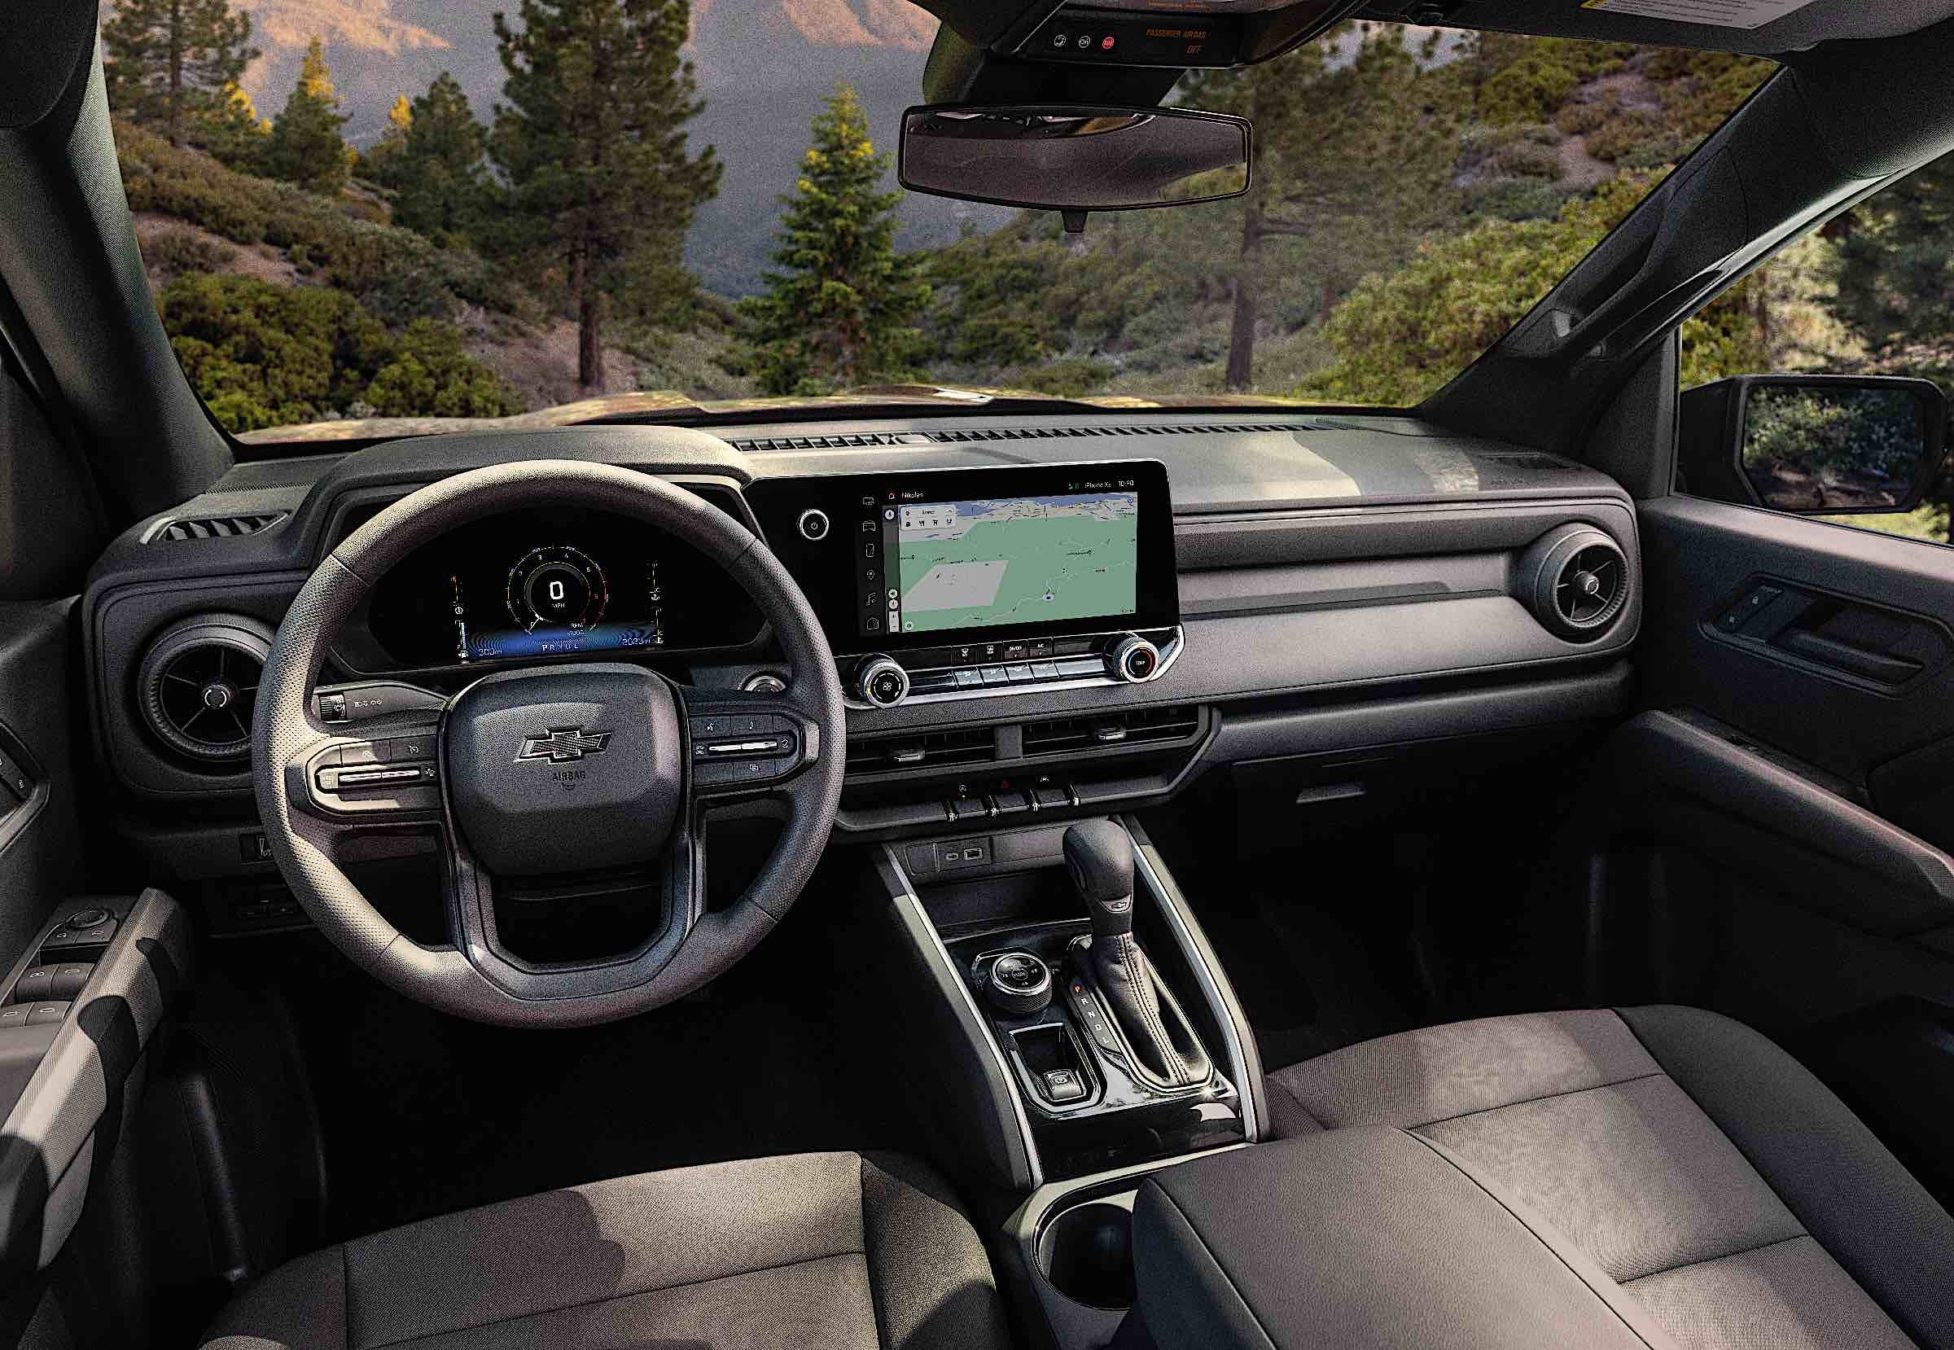 Internal dashboard and seating of the 2023 Chevrolet Colorado.